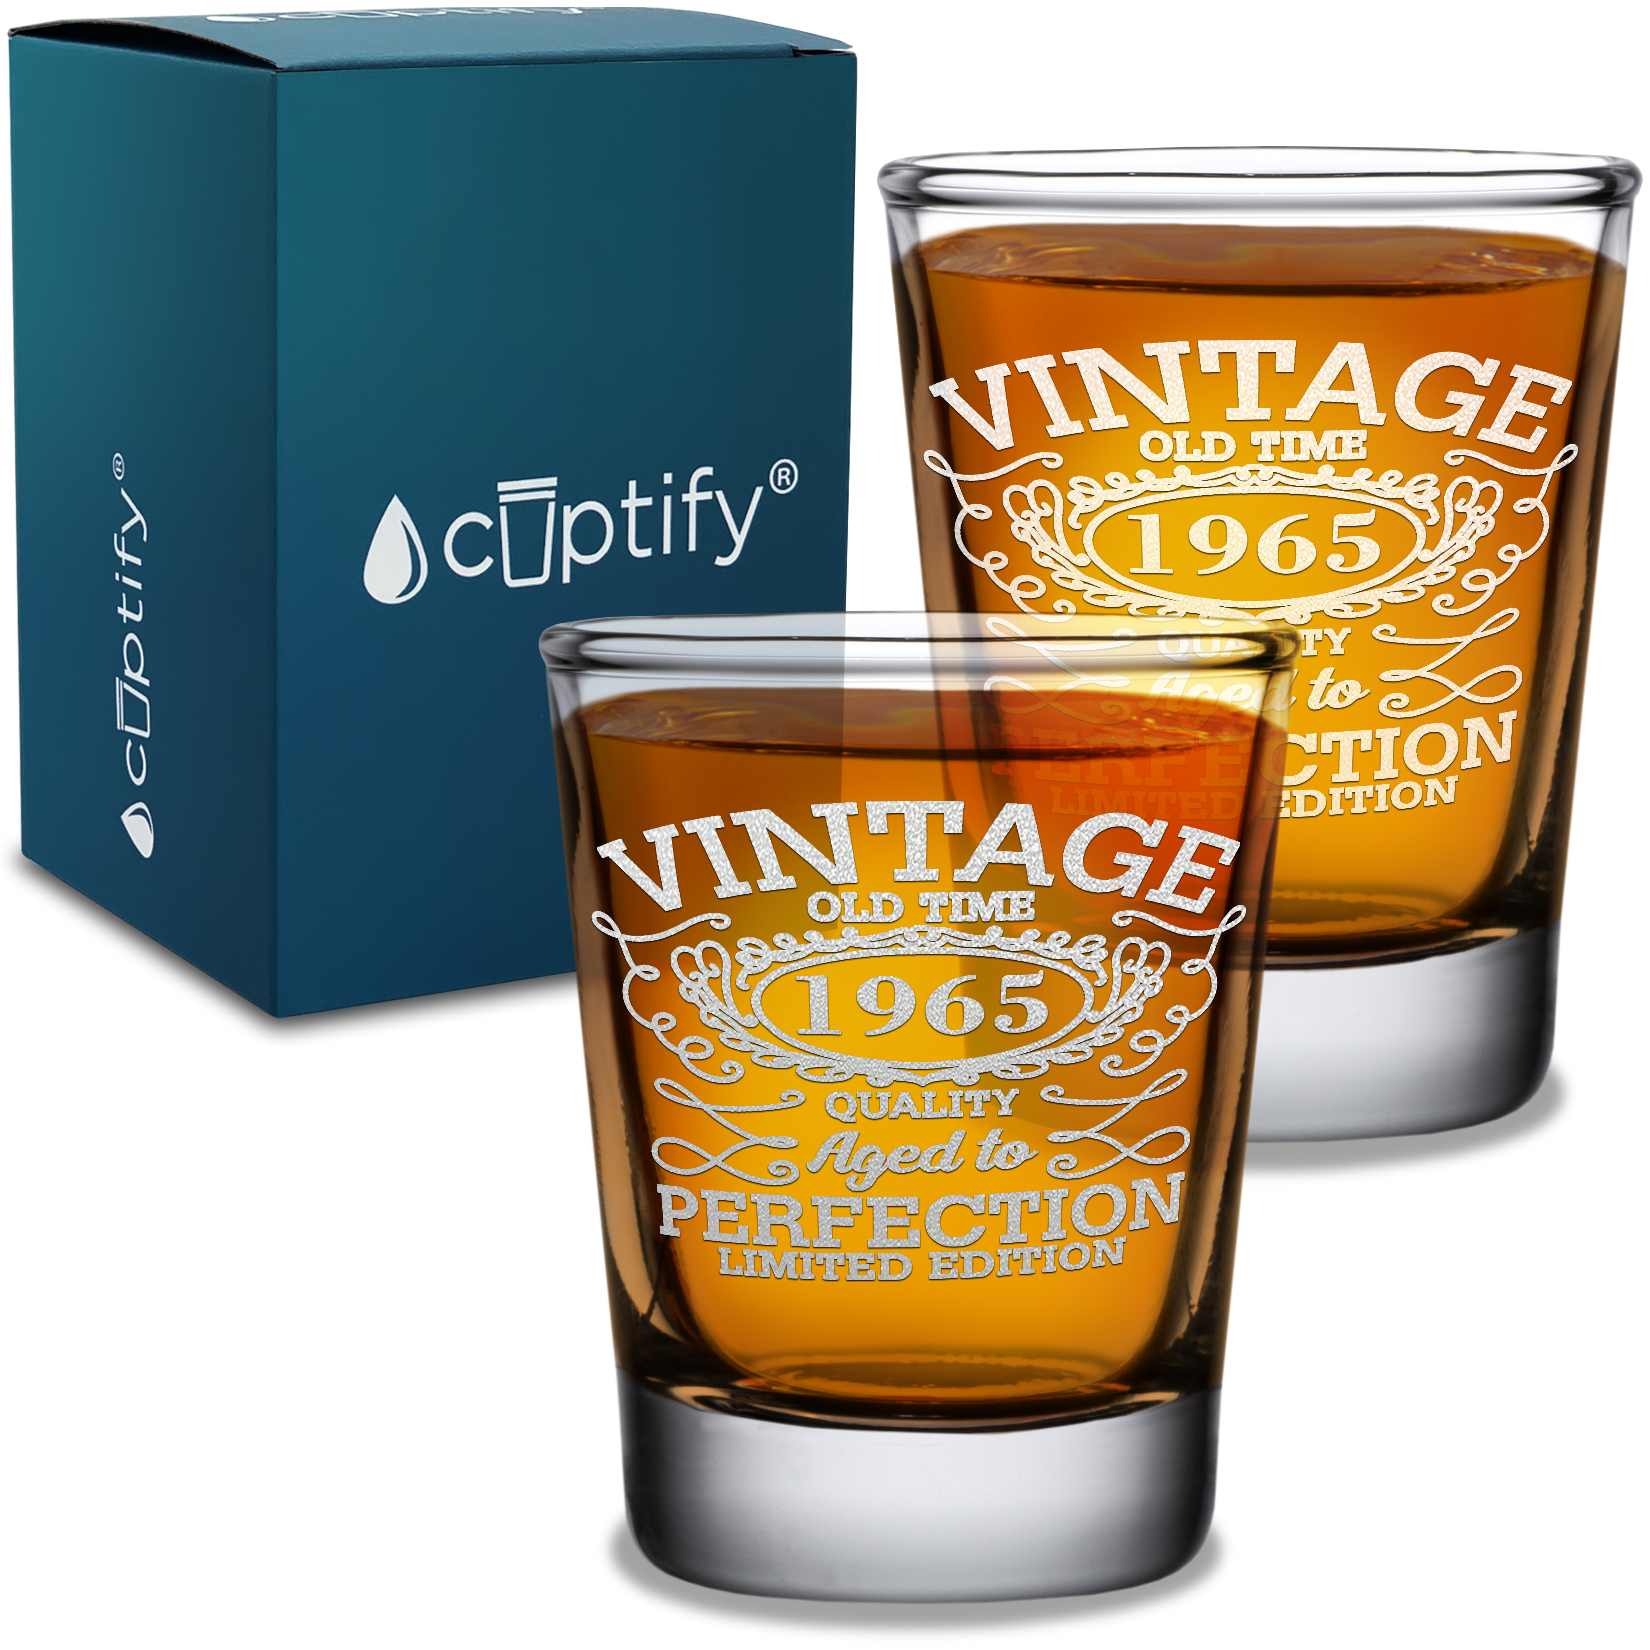 56th Birthday Vintage 56 Years Old Time 1965 Quality Laser Engraved 2oz Shot Glasses - Set of 2